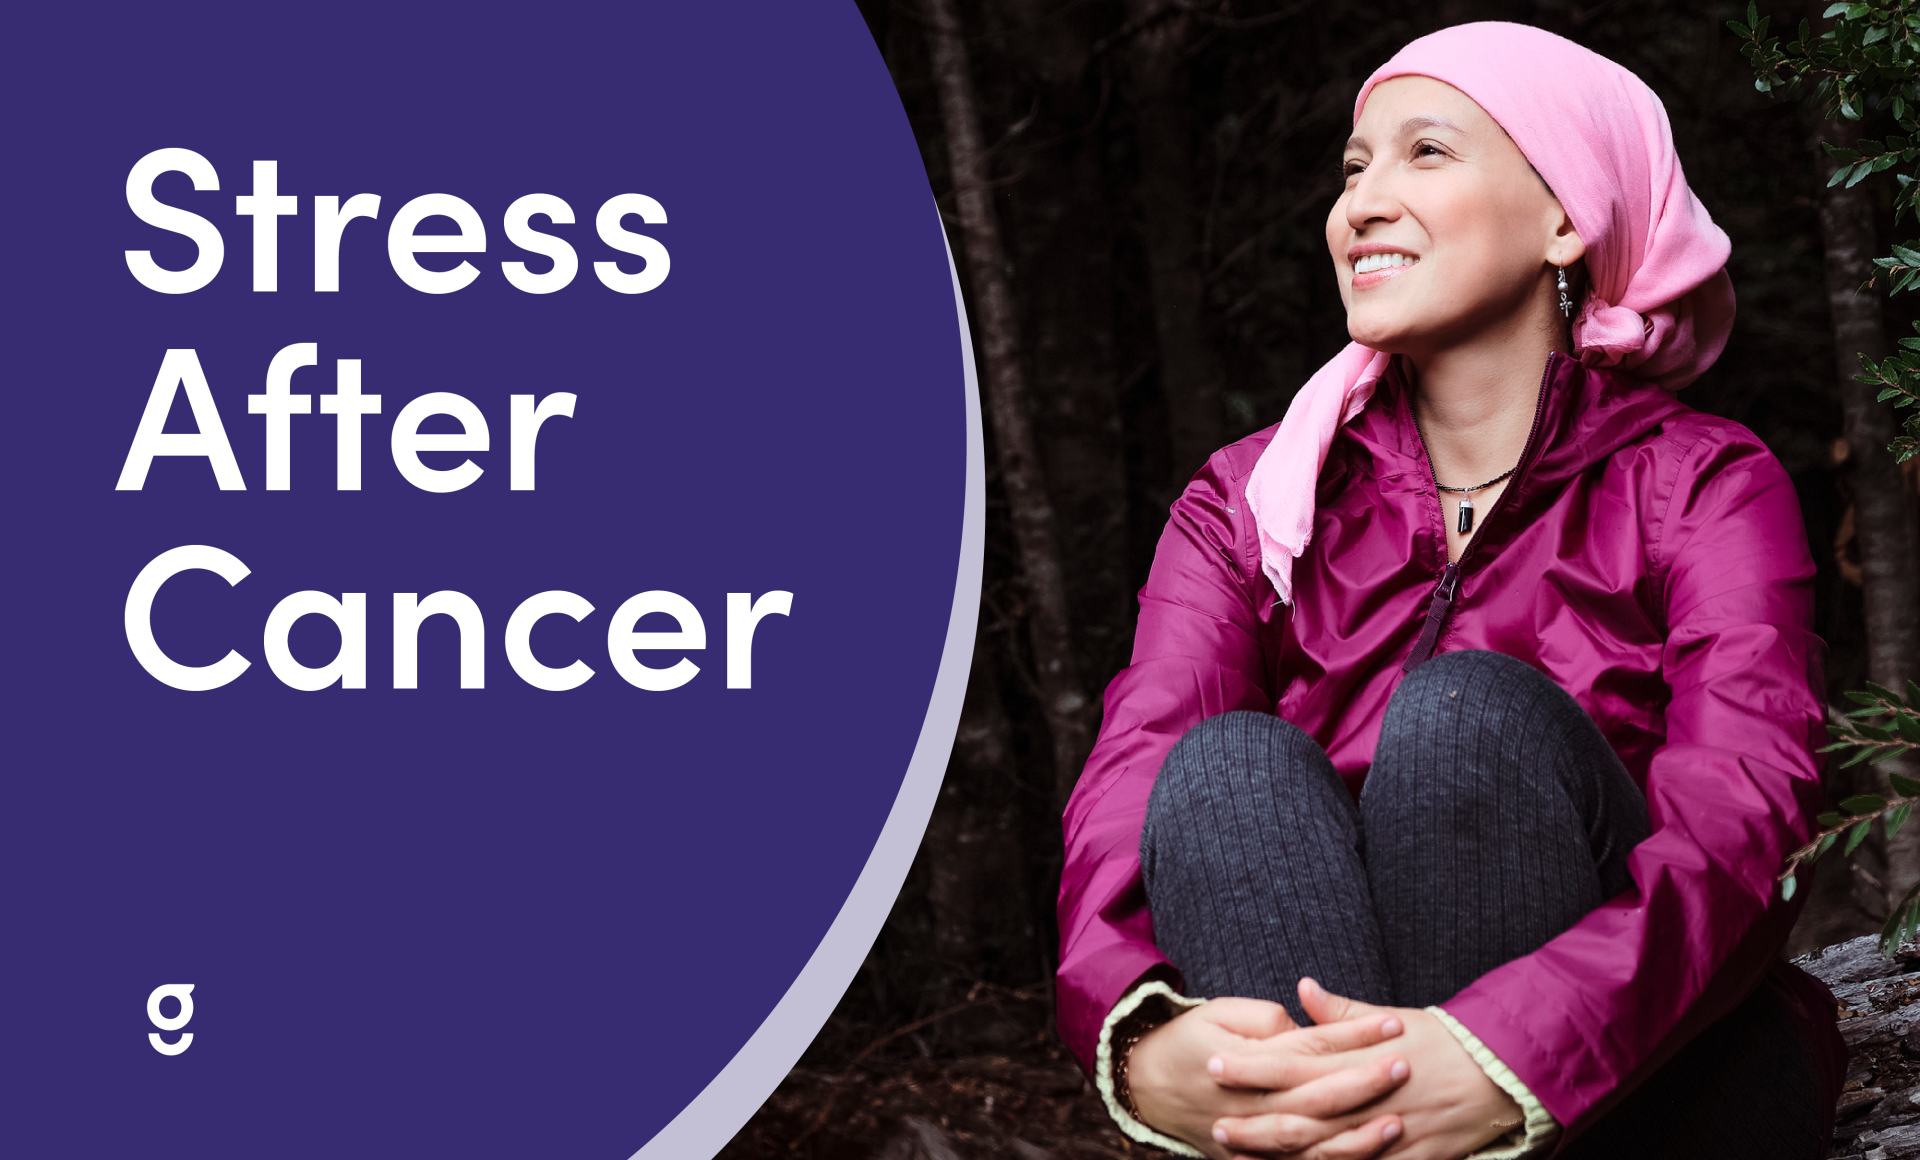 Stress After Cancer: How to Lower Your Stress as a Cancer Survivor